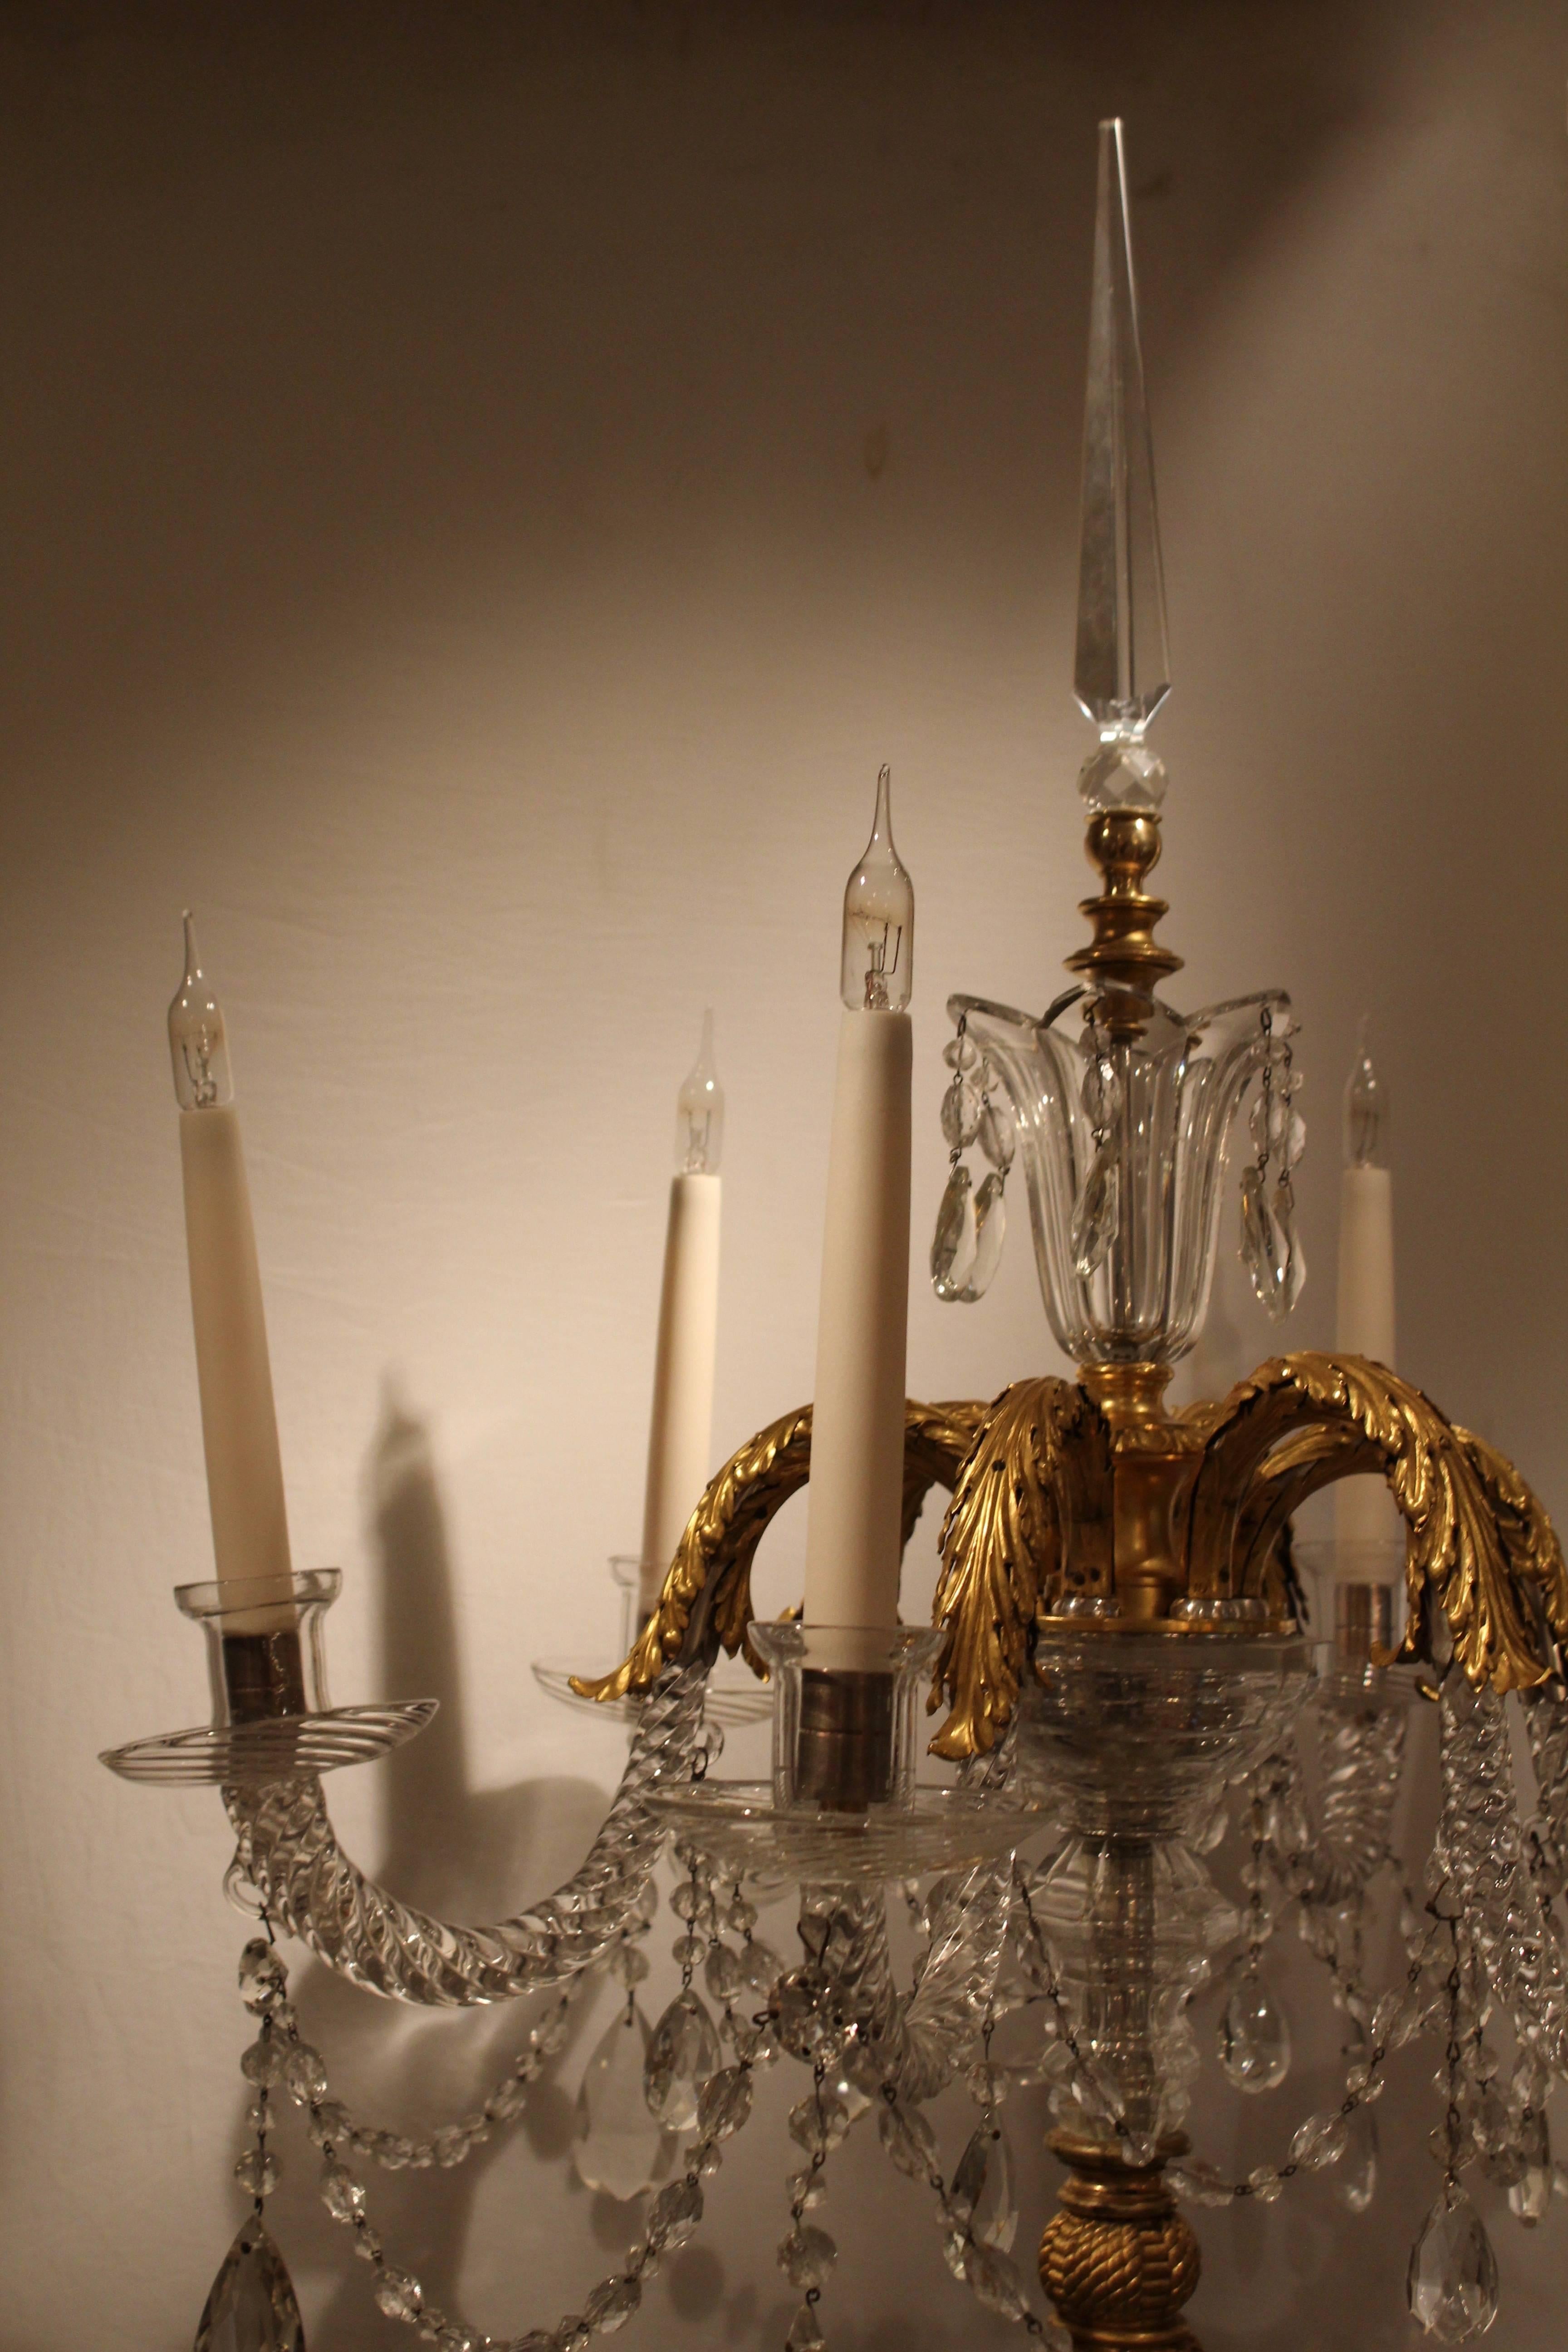 Pair of rare and unusual neoclassical floor standing candelabra, France, late 19th century. The carved marble base with acanthus leaf decoration is supported by four gilt bronze paw feet. The marble support leads to an ebonised wooden column